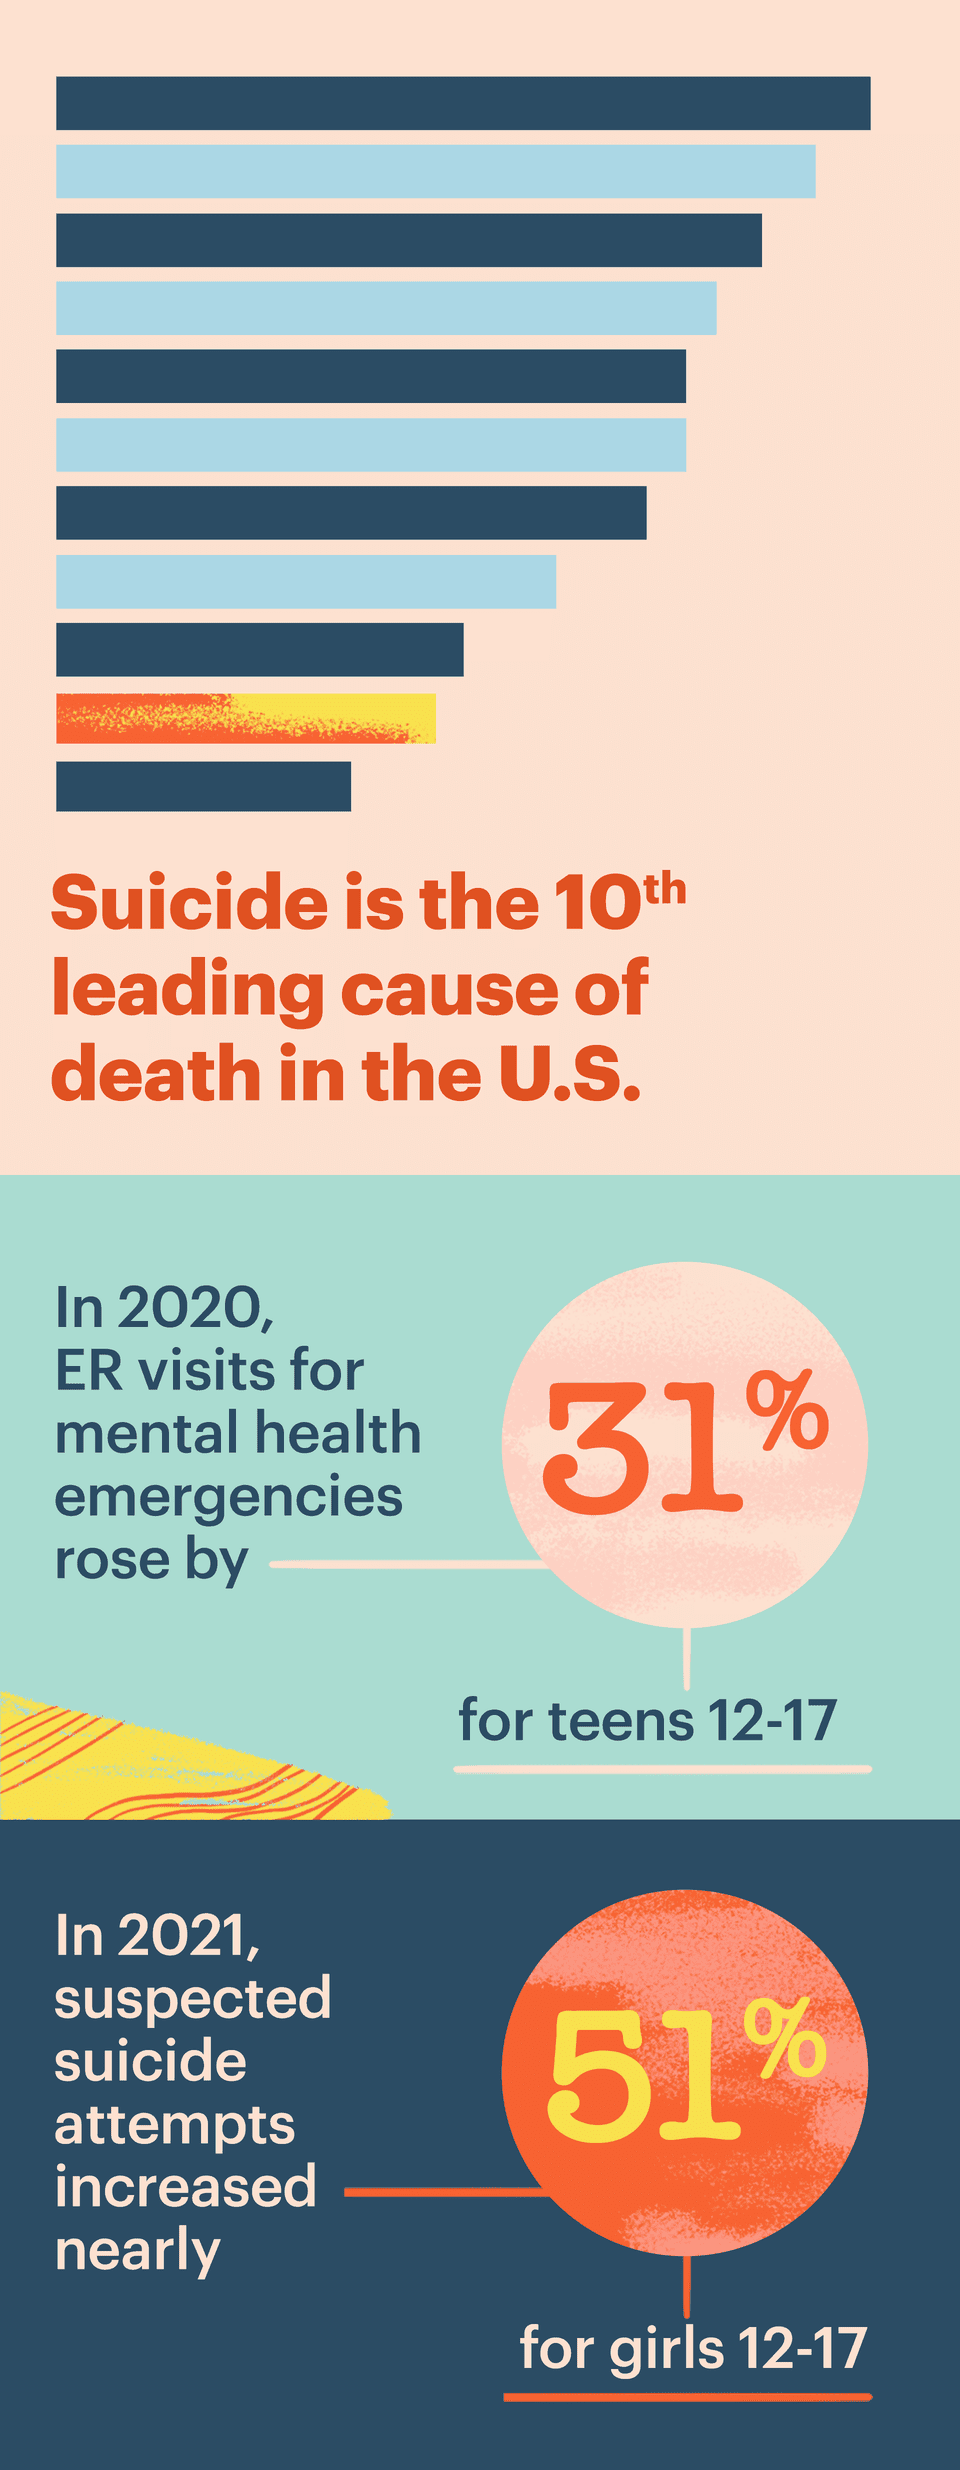 Suicide is the 10th leading cause of death in the U.S.; In 2020, ER visits for mental health emergencies rose by 31% for teens 12-17; In 2021, suspected suicide attempts increased nearly 51% for girls 12-17.